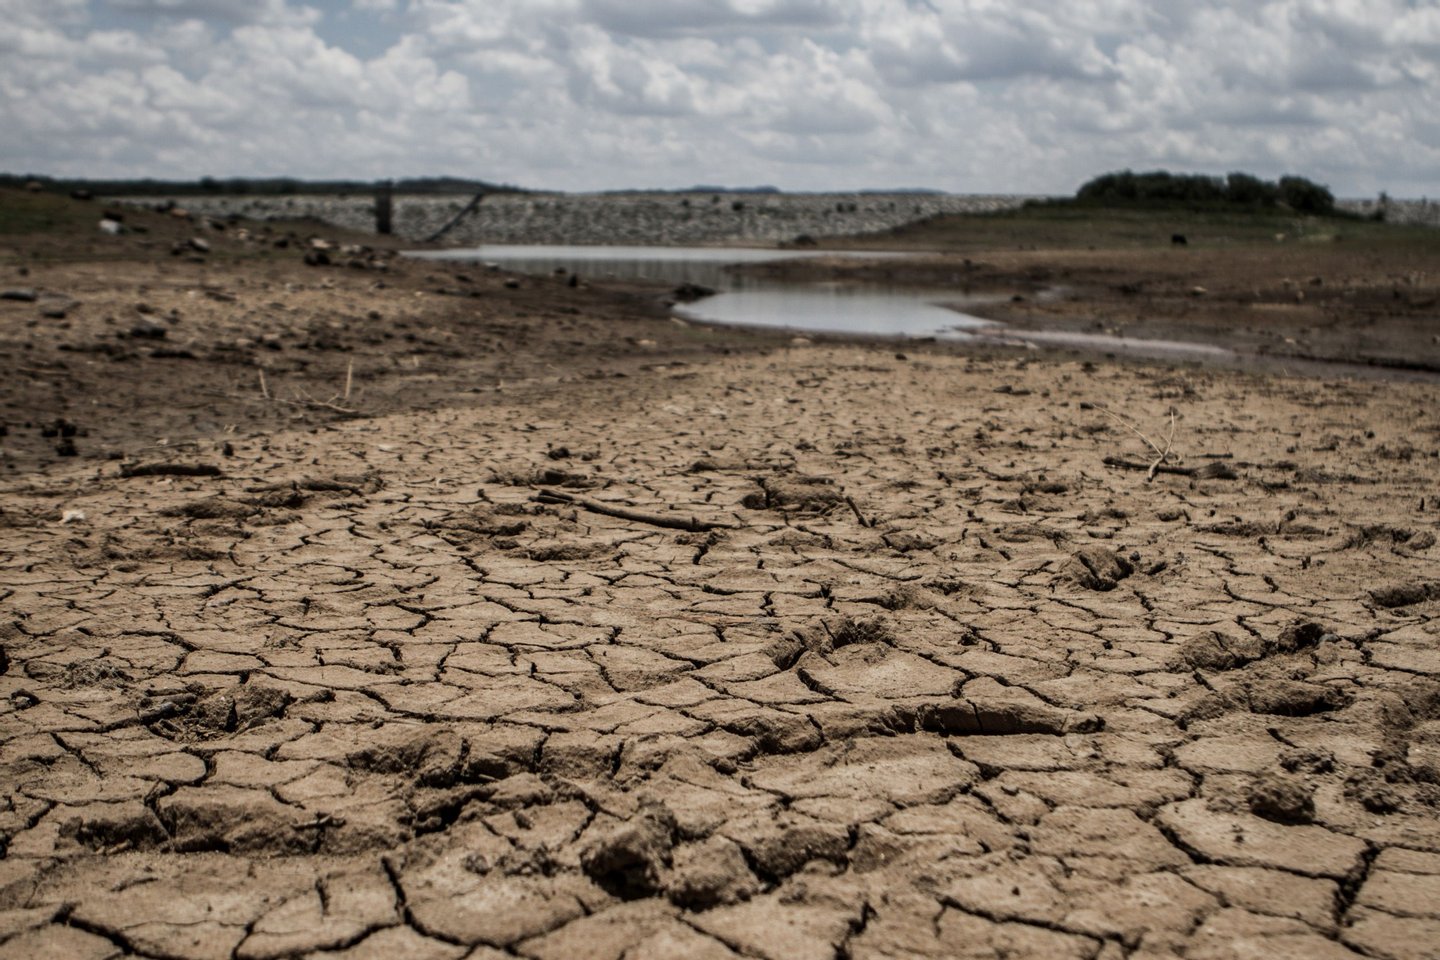 A photo taken on February 7, 2016 shows the fast drying catchment area of the Umzingwani dam in Matabeleland, Southwestern Zimbabwe . Zimbabwe's President Robert Mugabe on February 5, 2016 declared a "state of disaster" in many rural areas hit by a severe drought, with more than a quarter of the population facing food shortages. / AFP / Ziniyange Auntony (Photo credit should read ZINIYANGE AUNTONY/AFP/Getty Images)